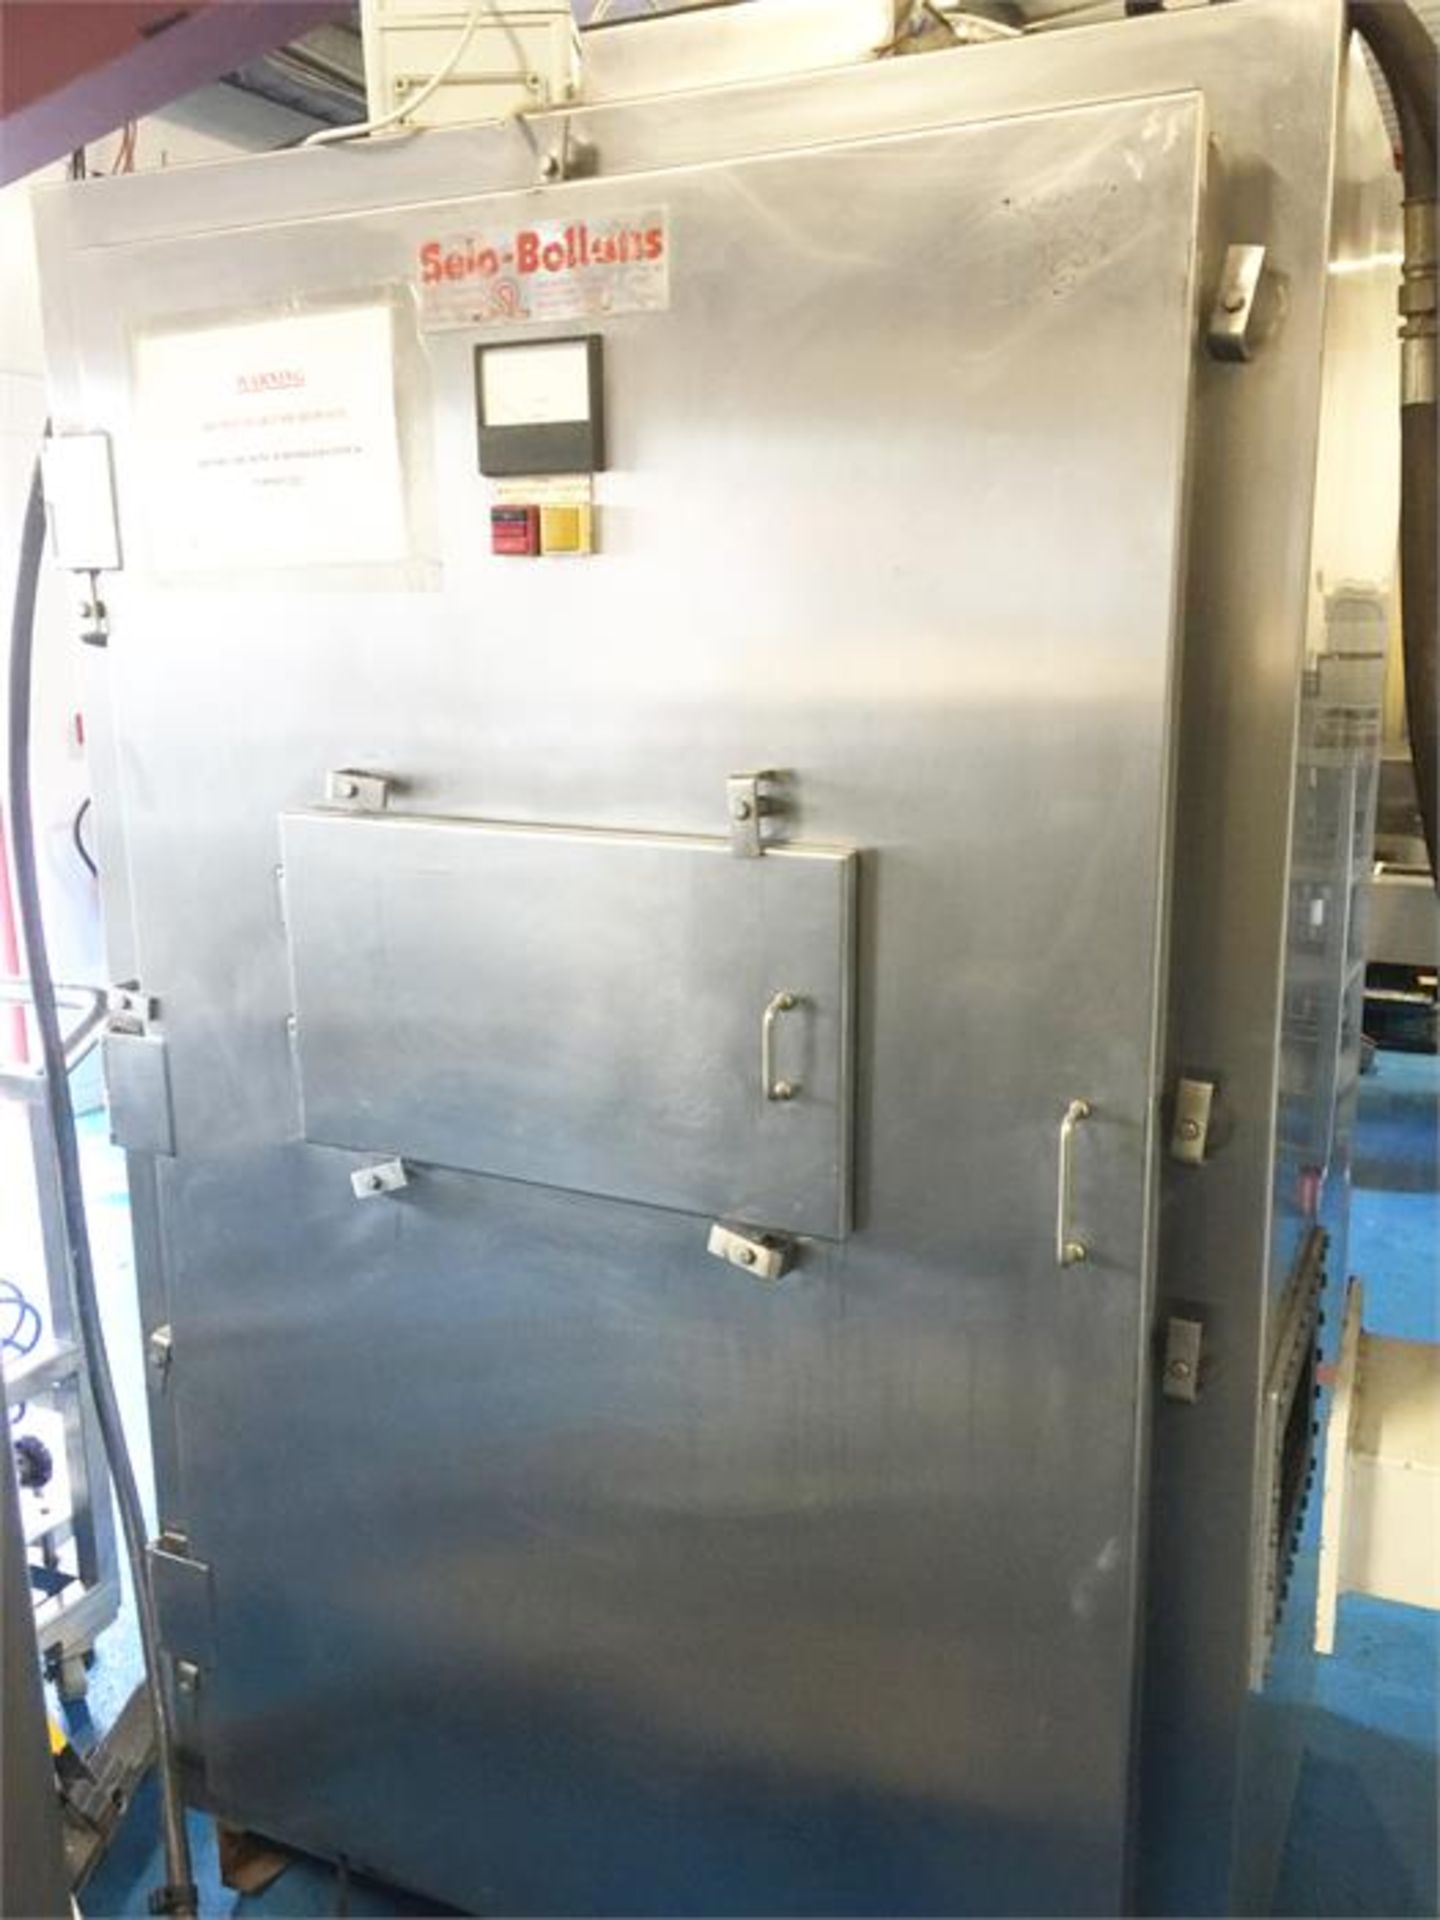 1 x Raytheon microwave oven. Previously used for defrosting boxes of meat prior to processing. - Image 4 of 8